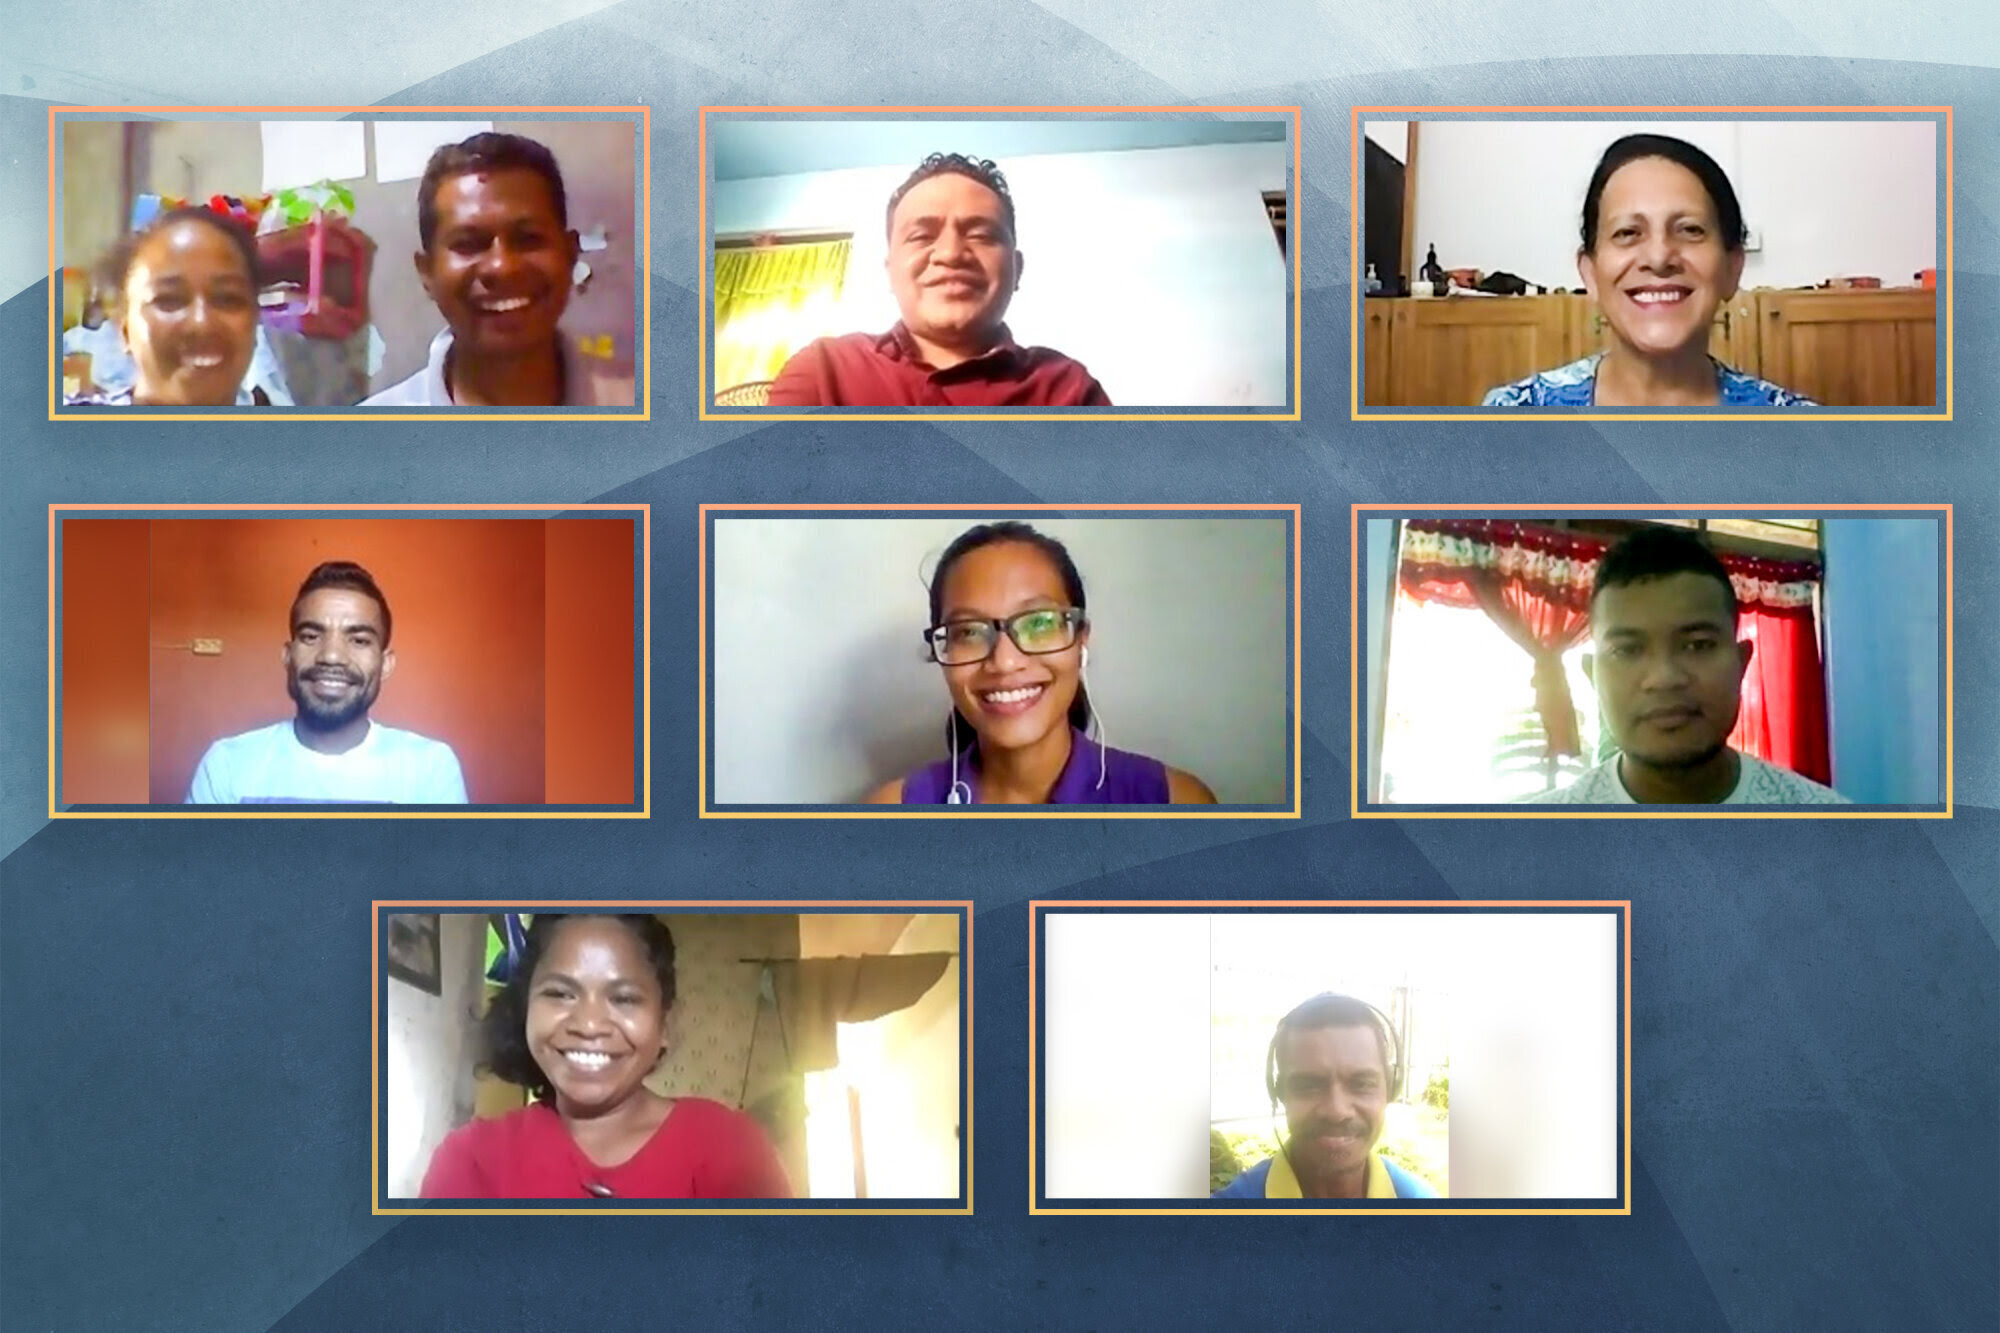 The nine members of the newly elected National Spiritual Assembly of the Bahá’ís of Timor-Leste gather online for their first meeting.